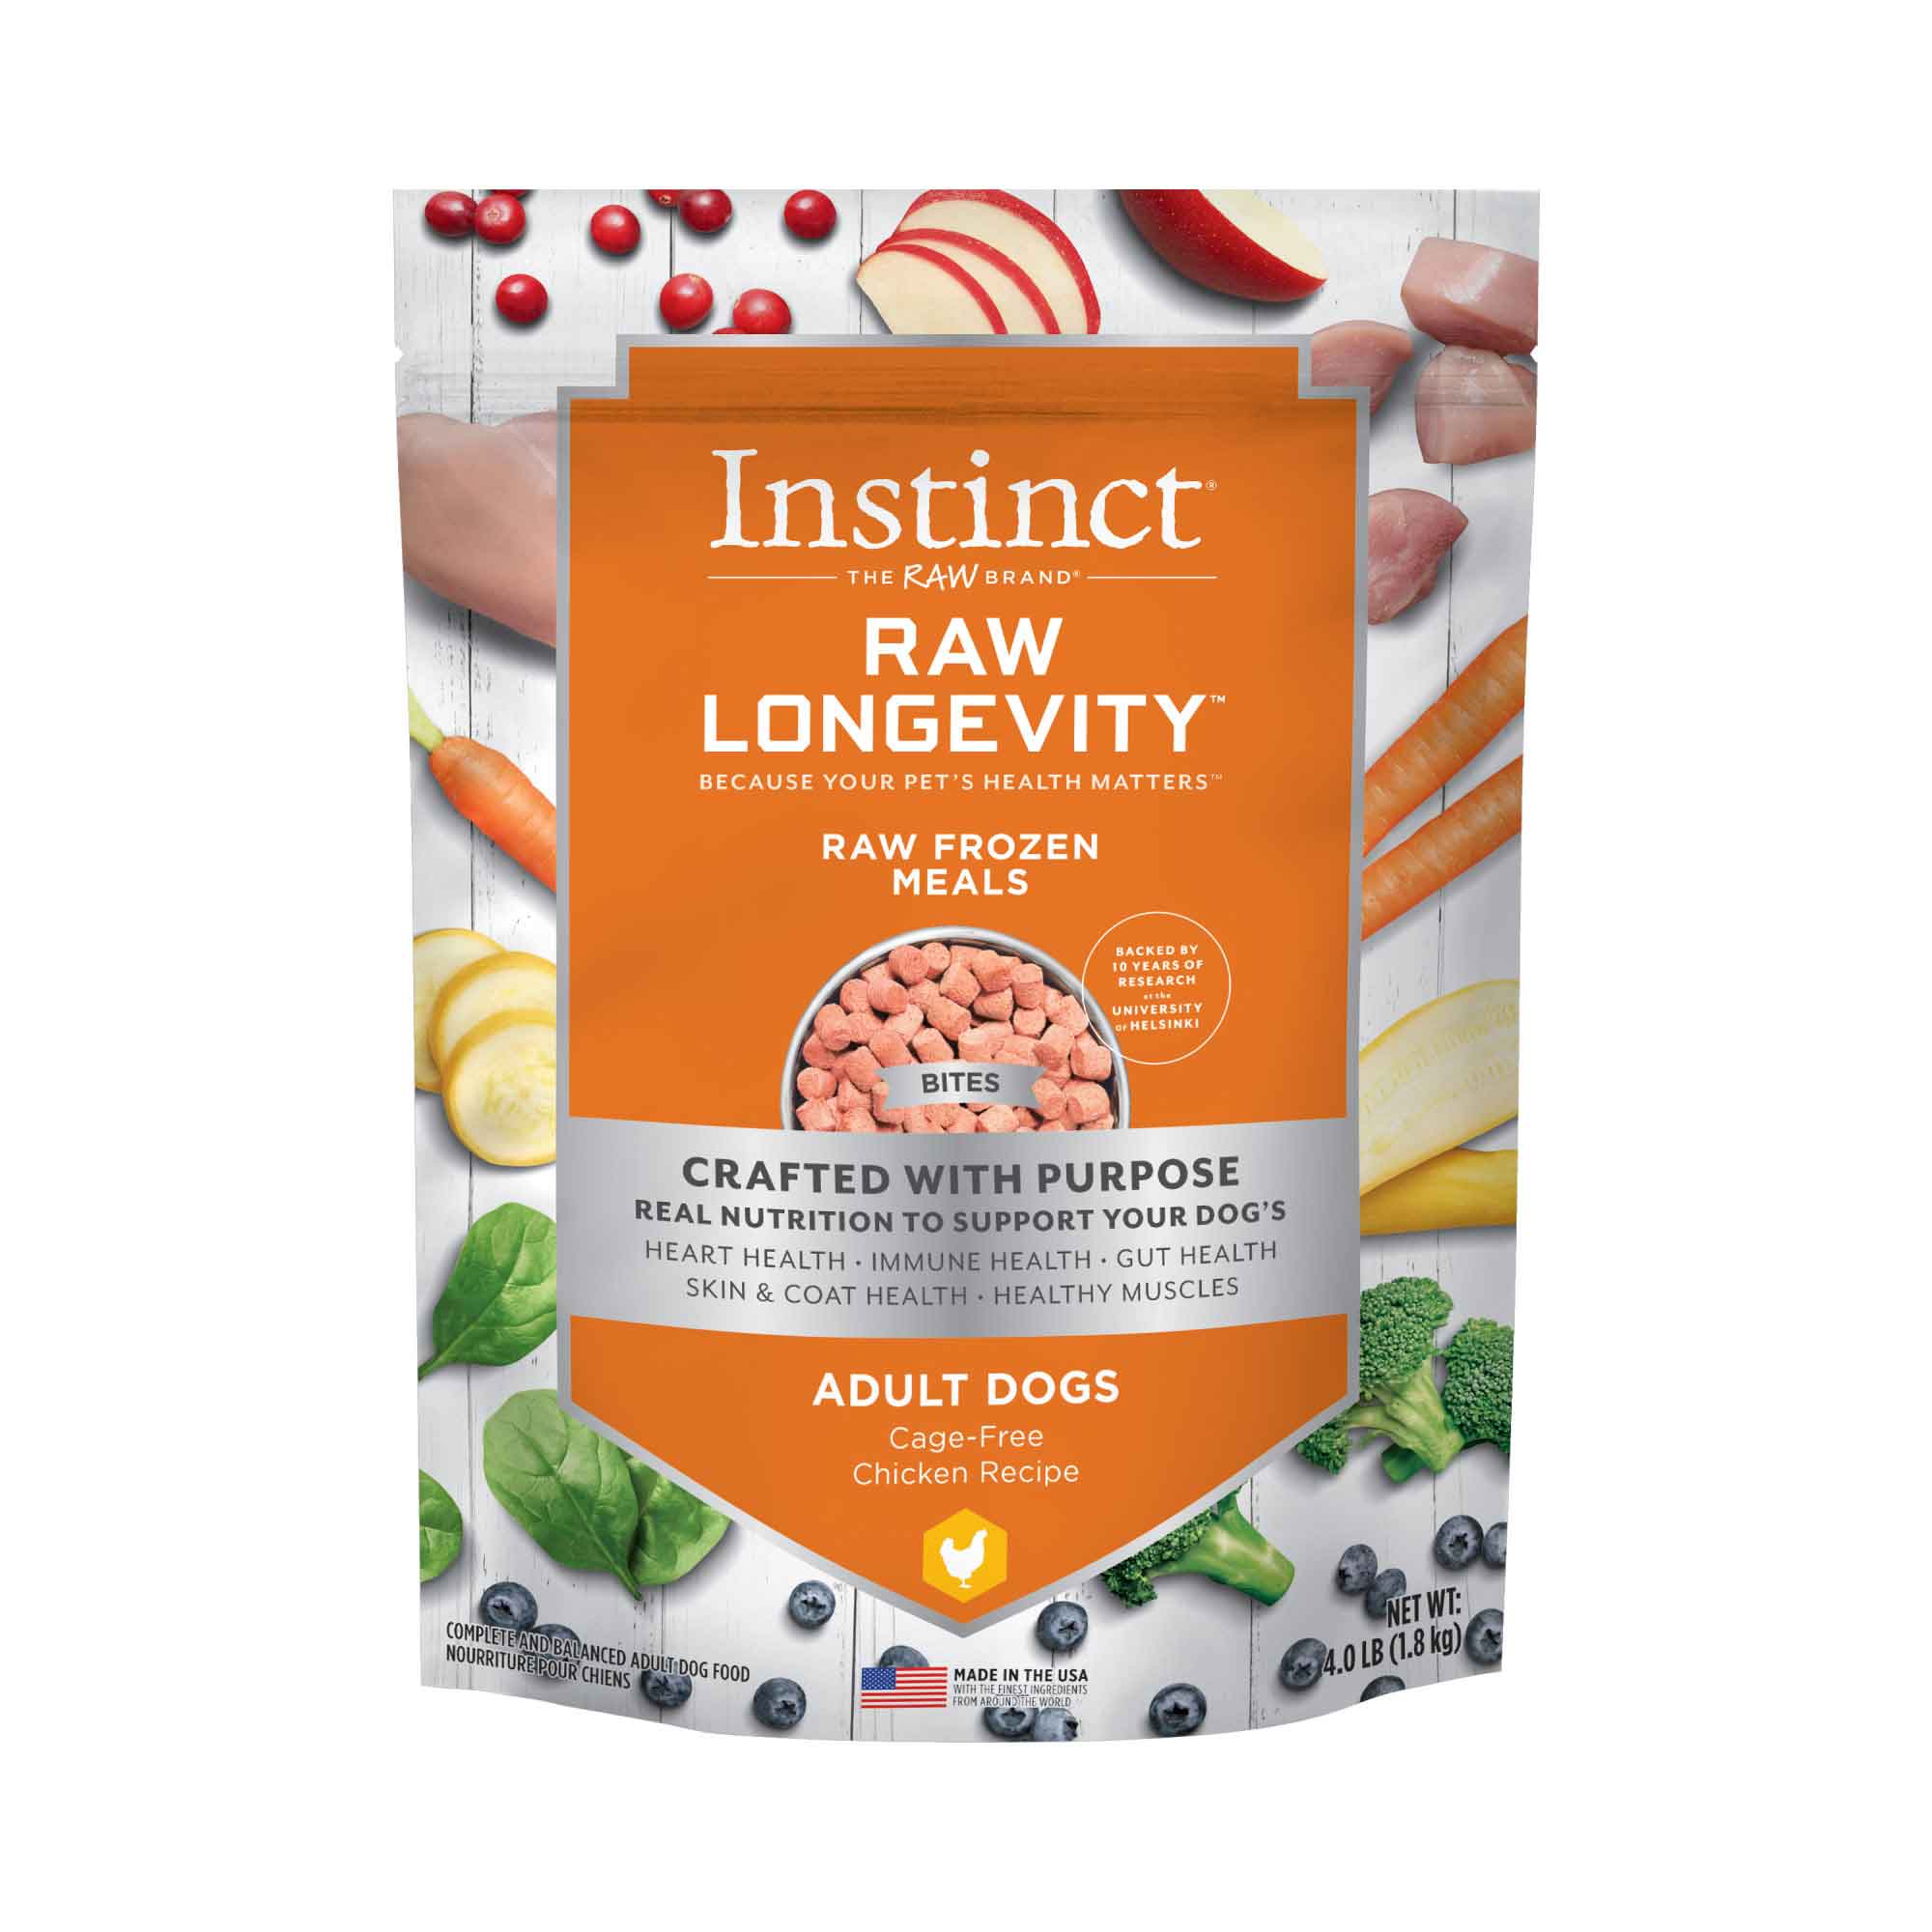 Instinct Raw Longevity Cage Free Chicken Frozen Dog Food, 4 Pounds - Not Available For Delivery